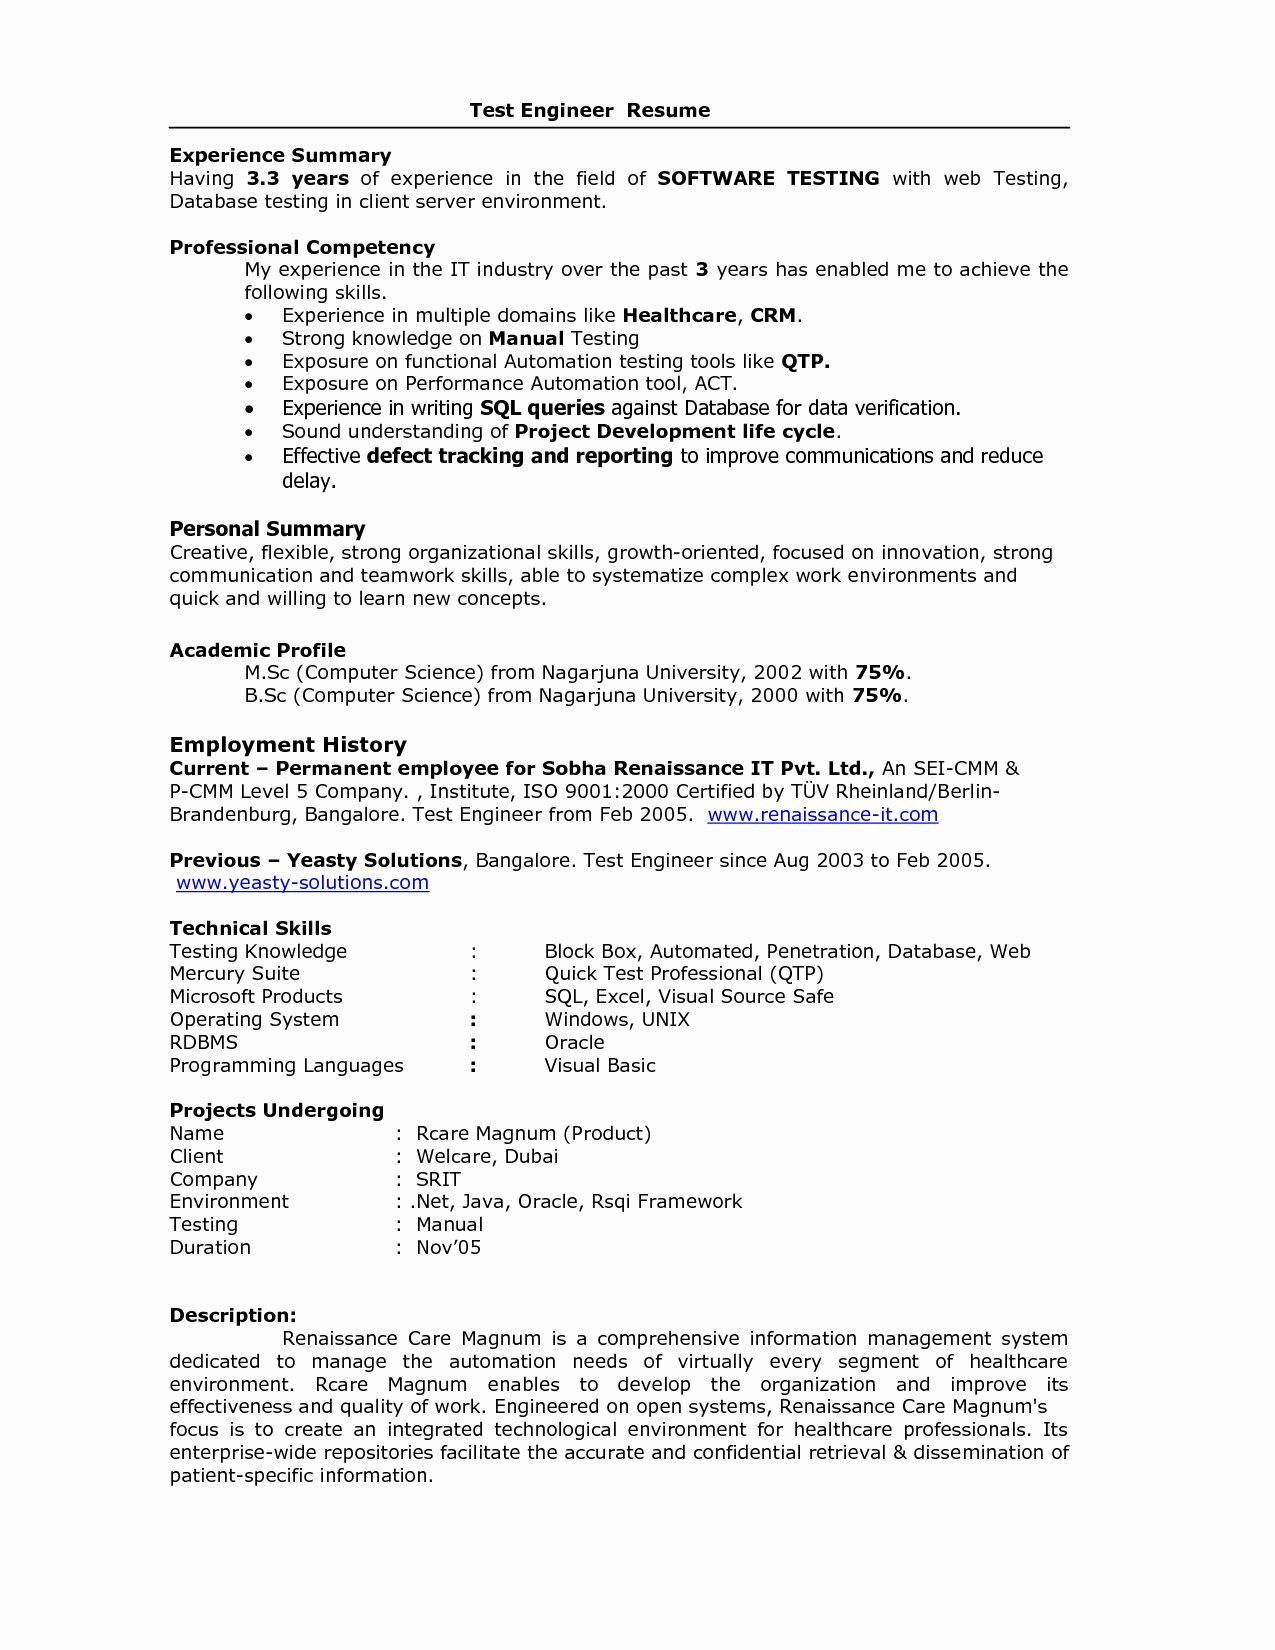 Software Testing Resume Samples for 3 Years Experience 5 Years Testing Experience Resume format , #experience #format …